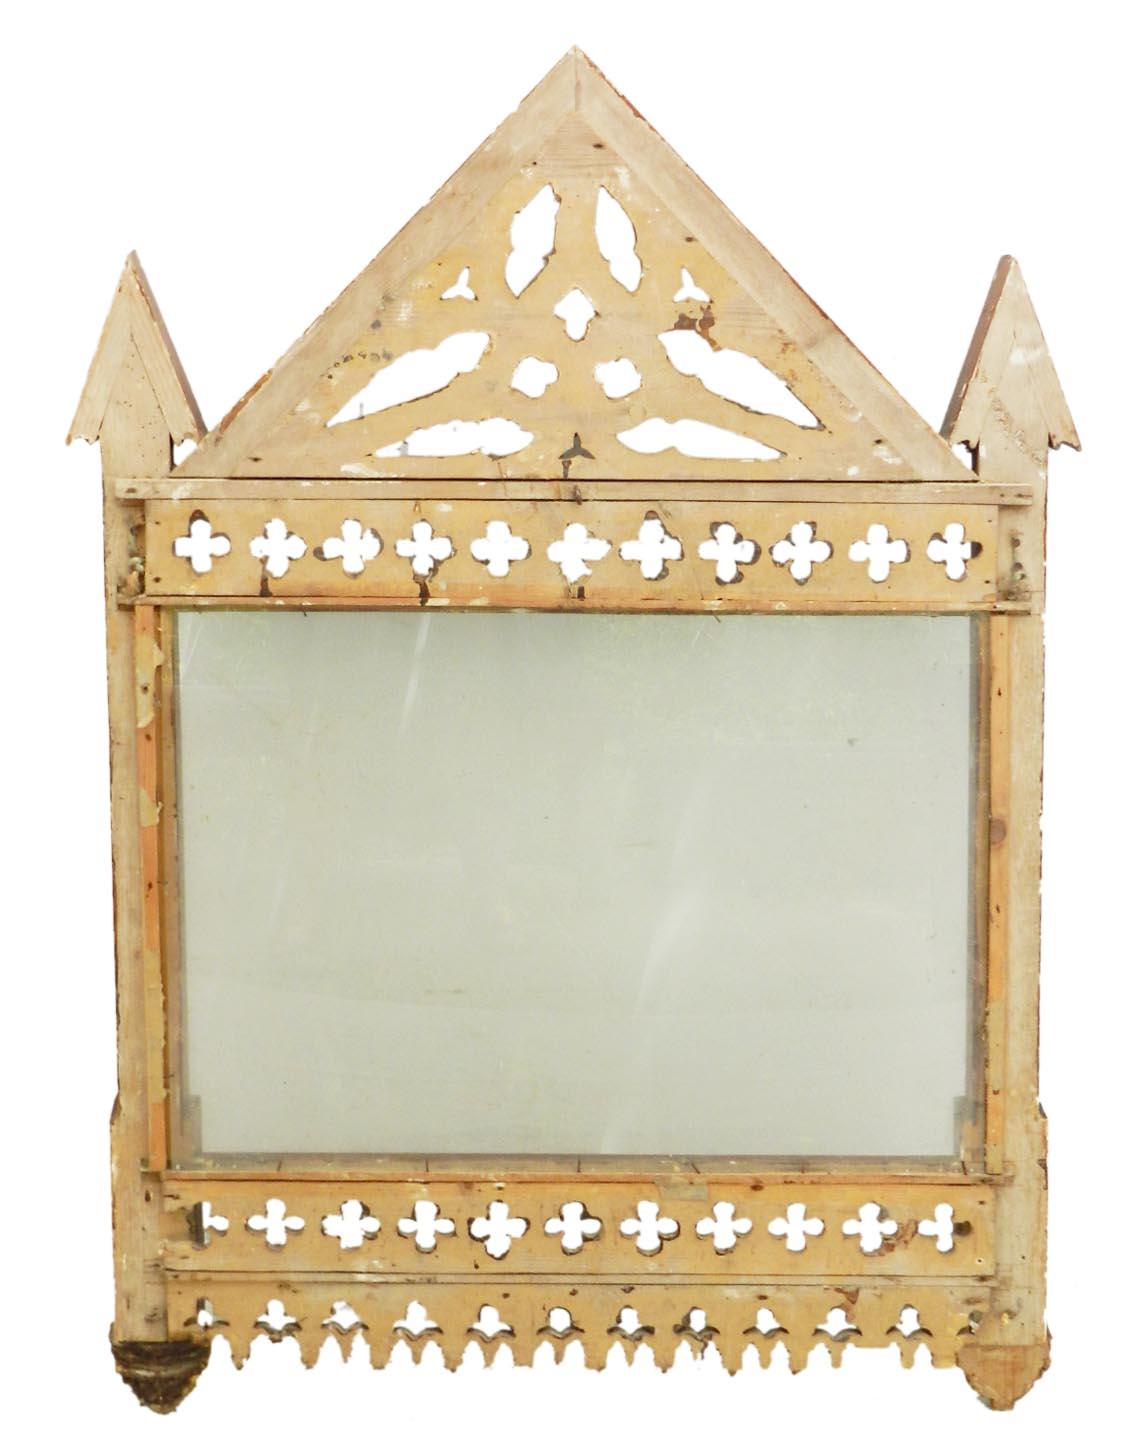 Gothic Revival 19th Century Gothic Wall Mirror Frame No.1  Decorative Picture Frame